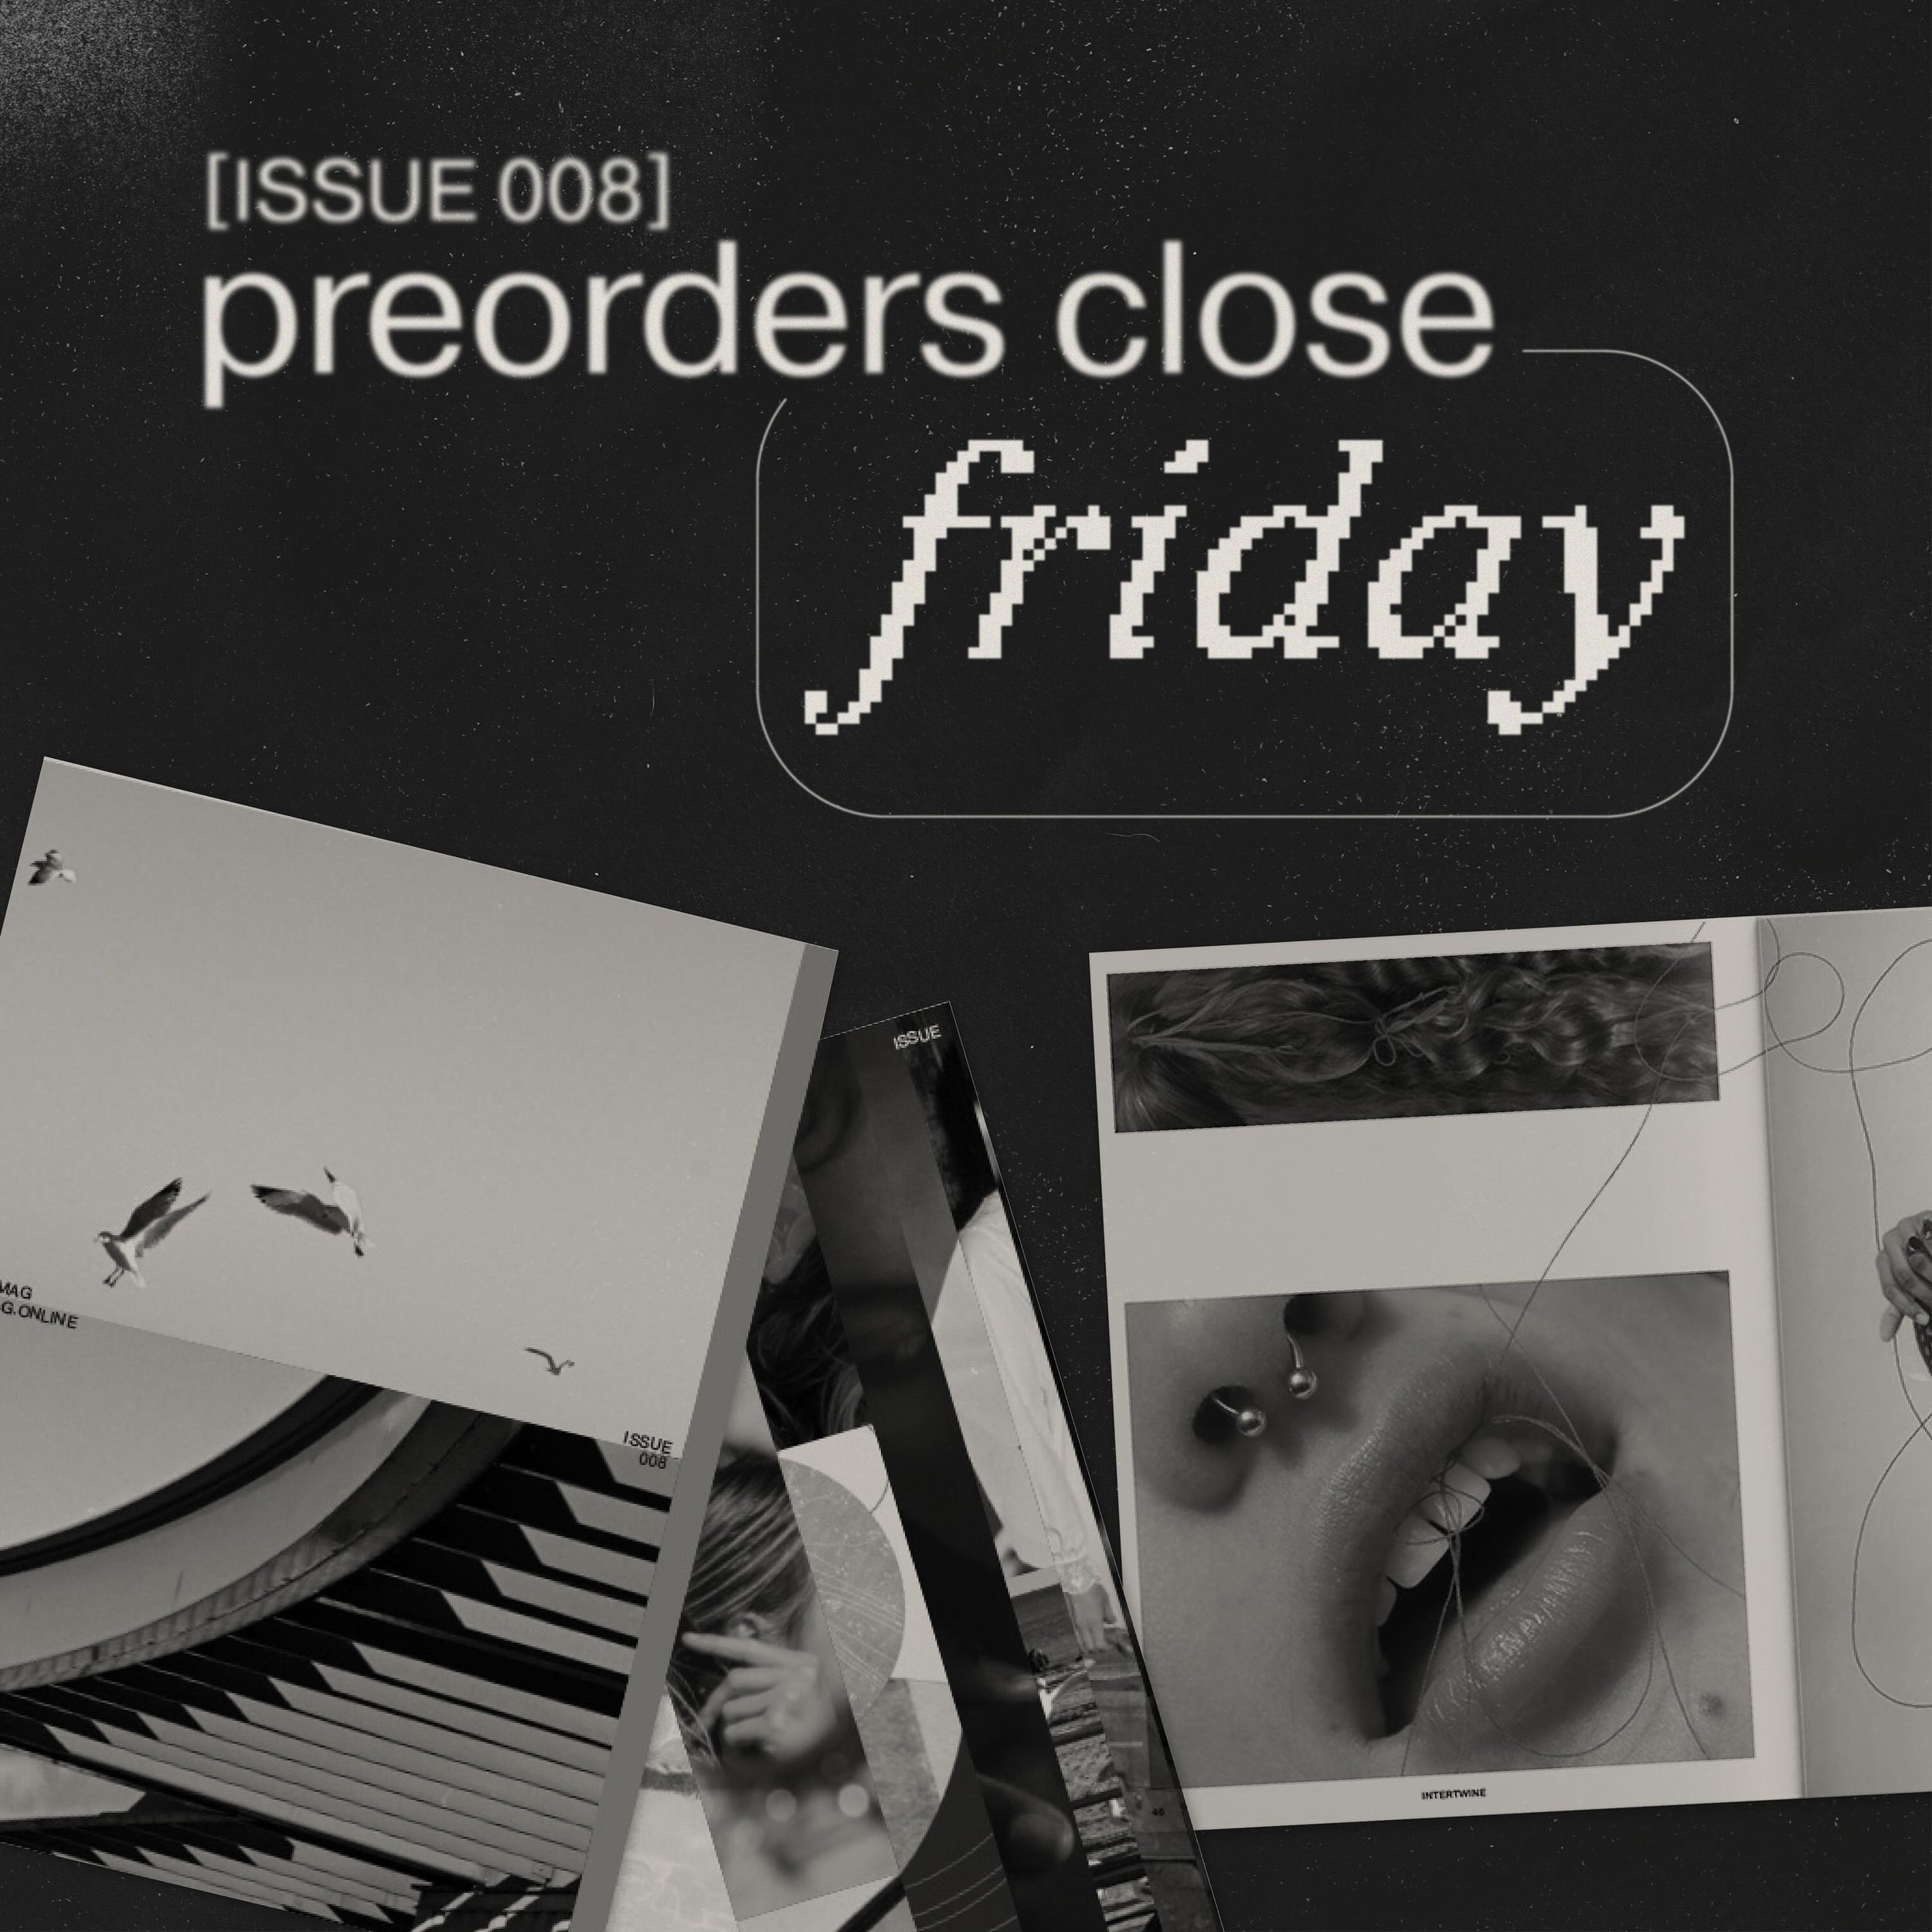 THE TIME IS NOW‼️

Preorders for the issue 008 print package close this Friday. That&rsquo;s right THIS Friday. So get your copy of this sexy mag❤️&zwj;🔥

Link in bio to order today.